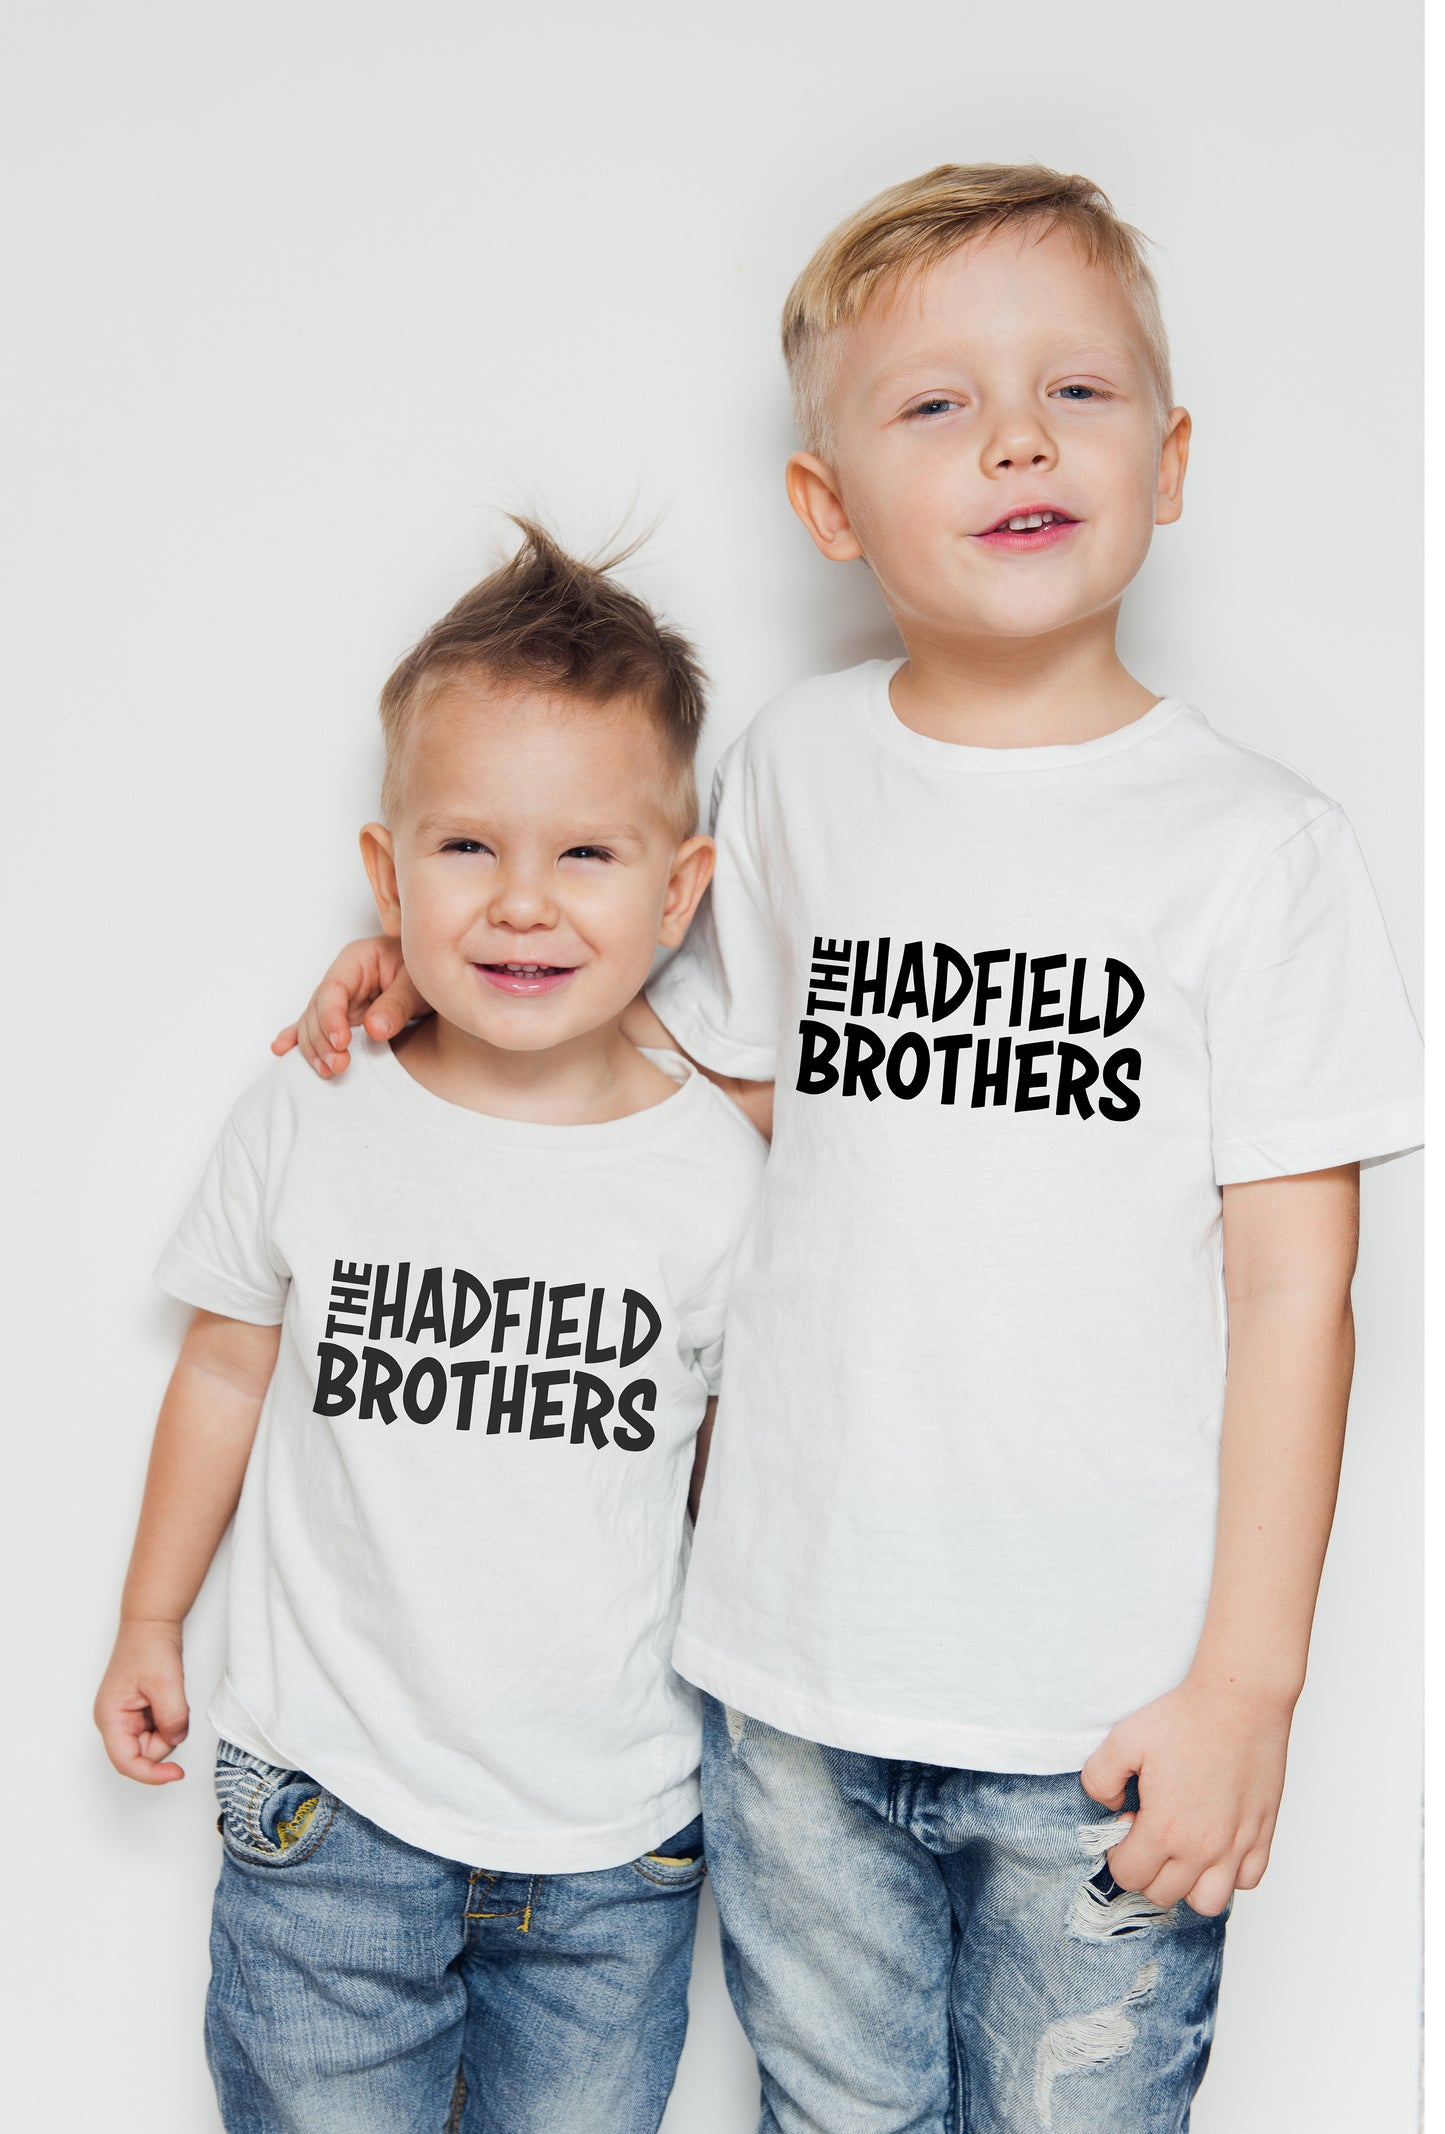 Personalised Cotton Kids T shirt for Brothers